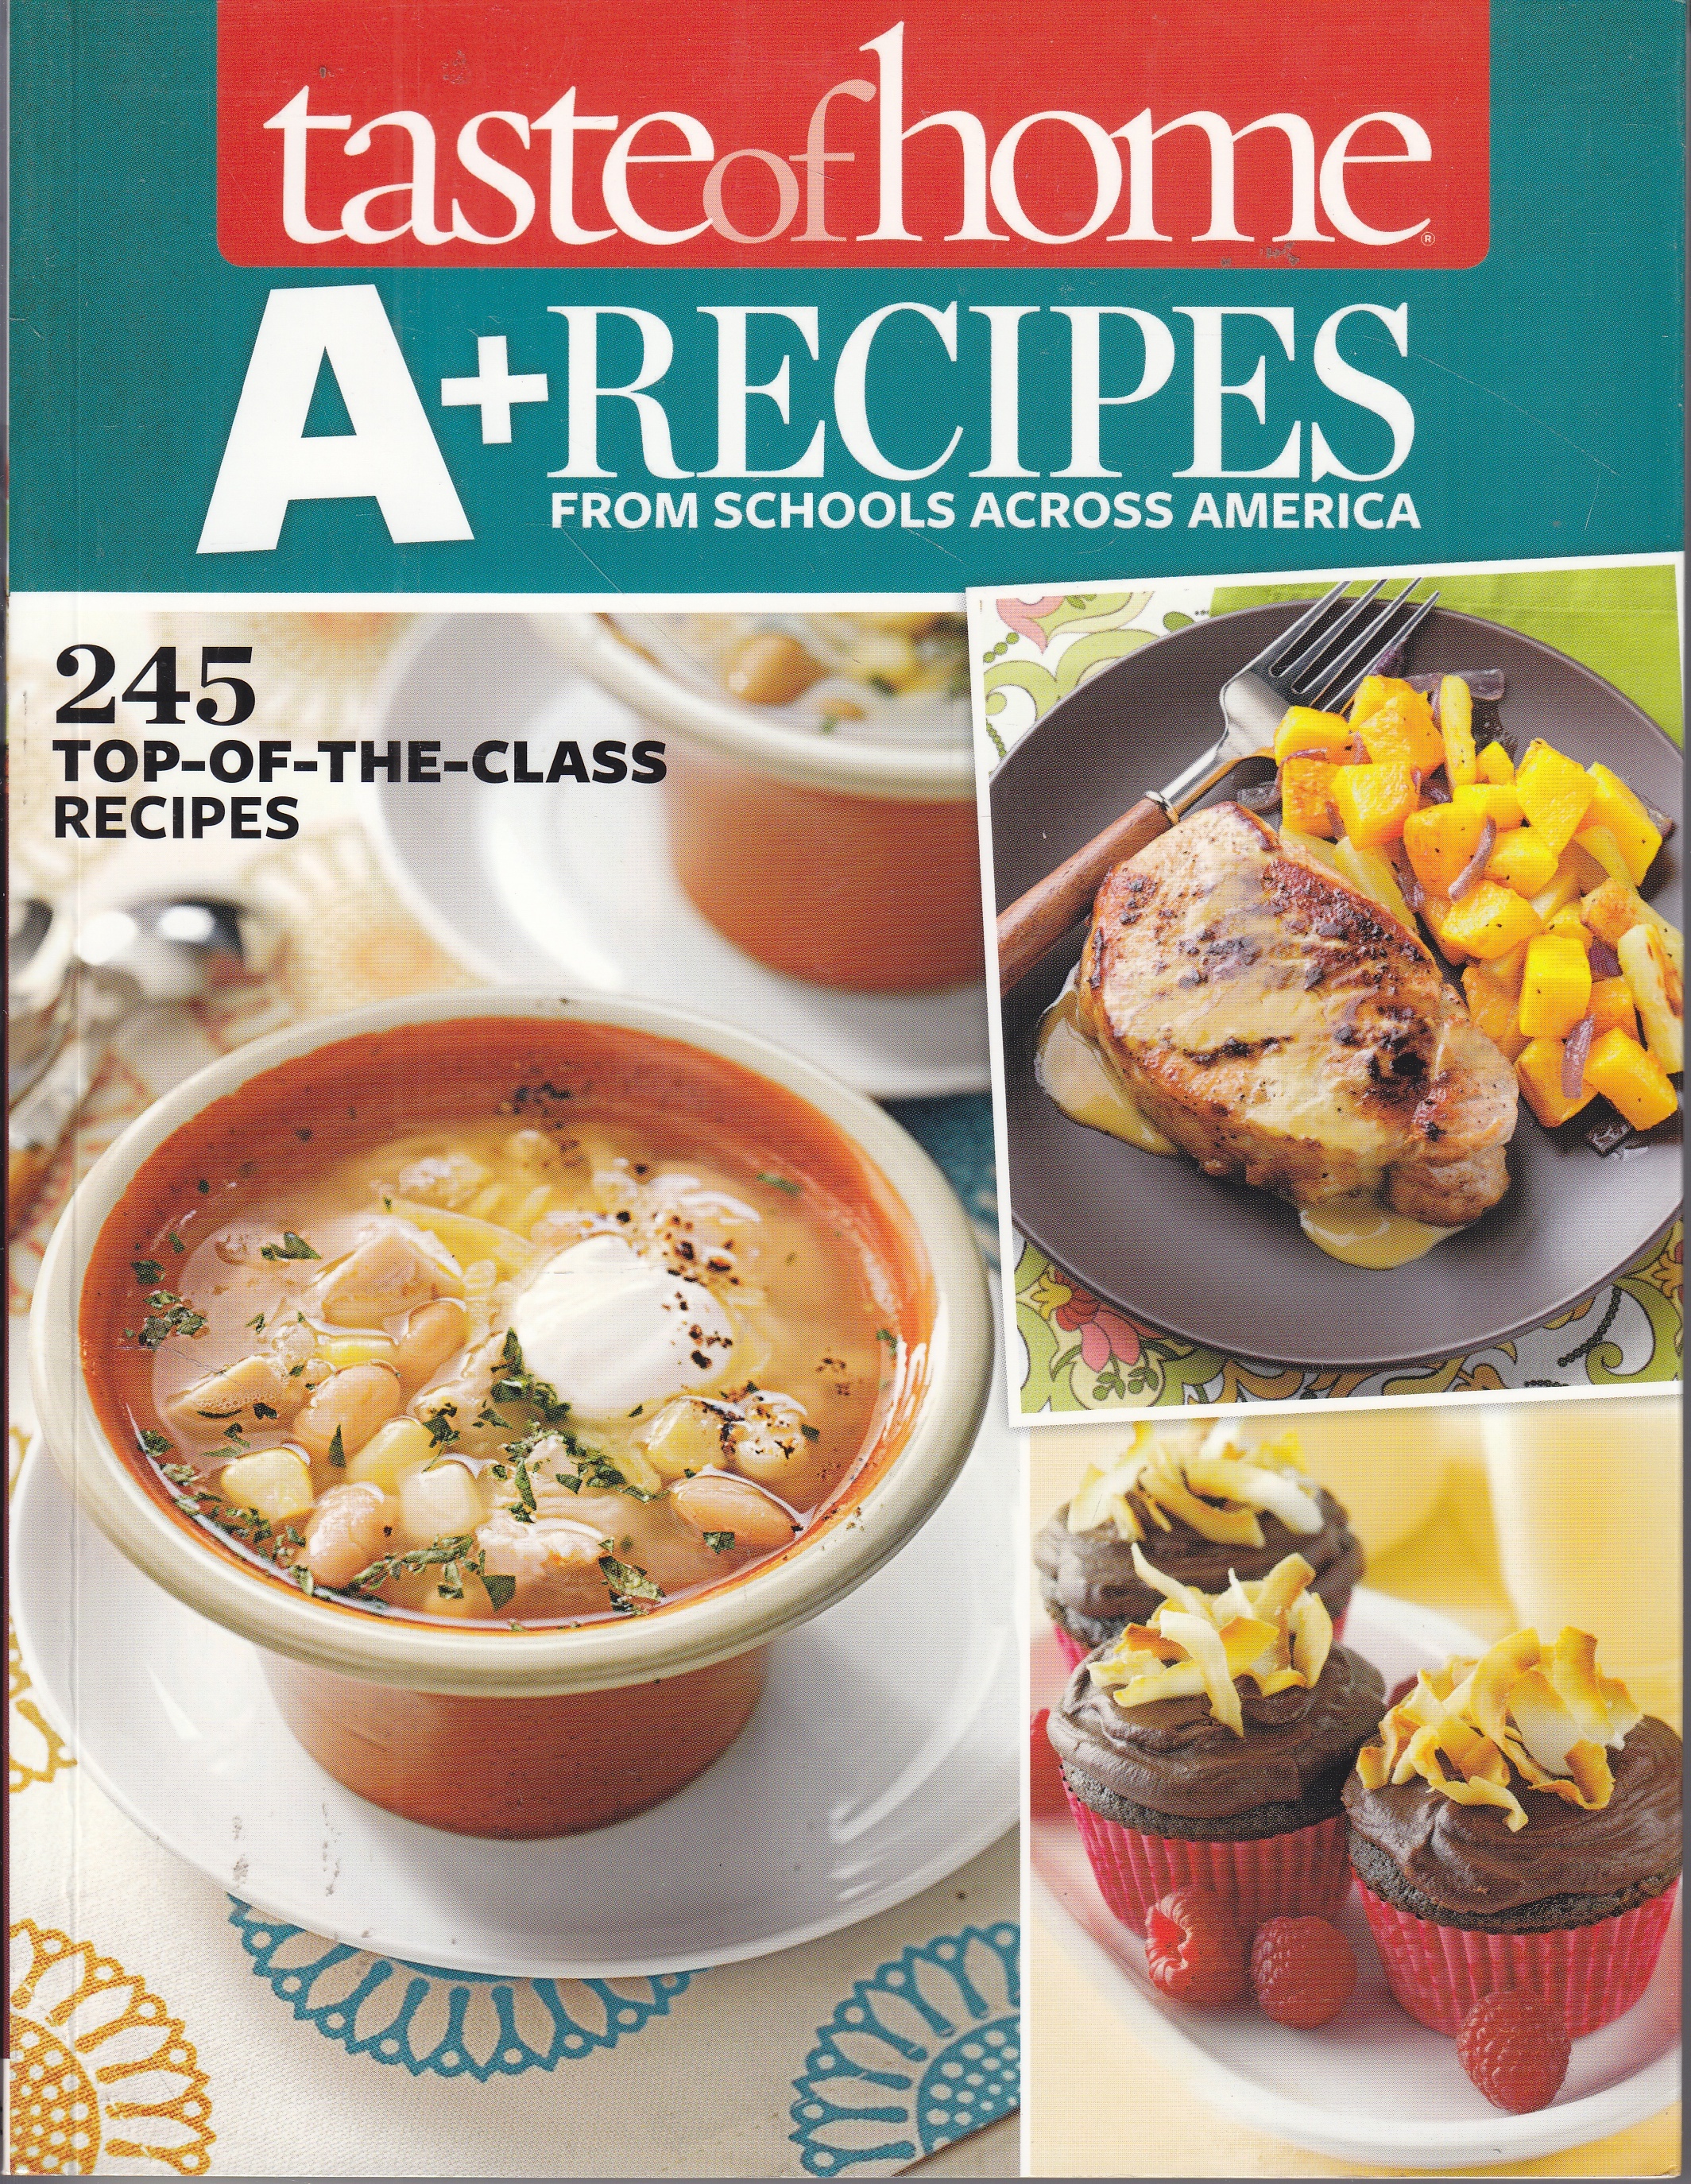 Image for Taste of Home A+ Recipes from Schools Across America 245 Top-Of-The-Class Recipes